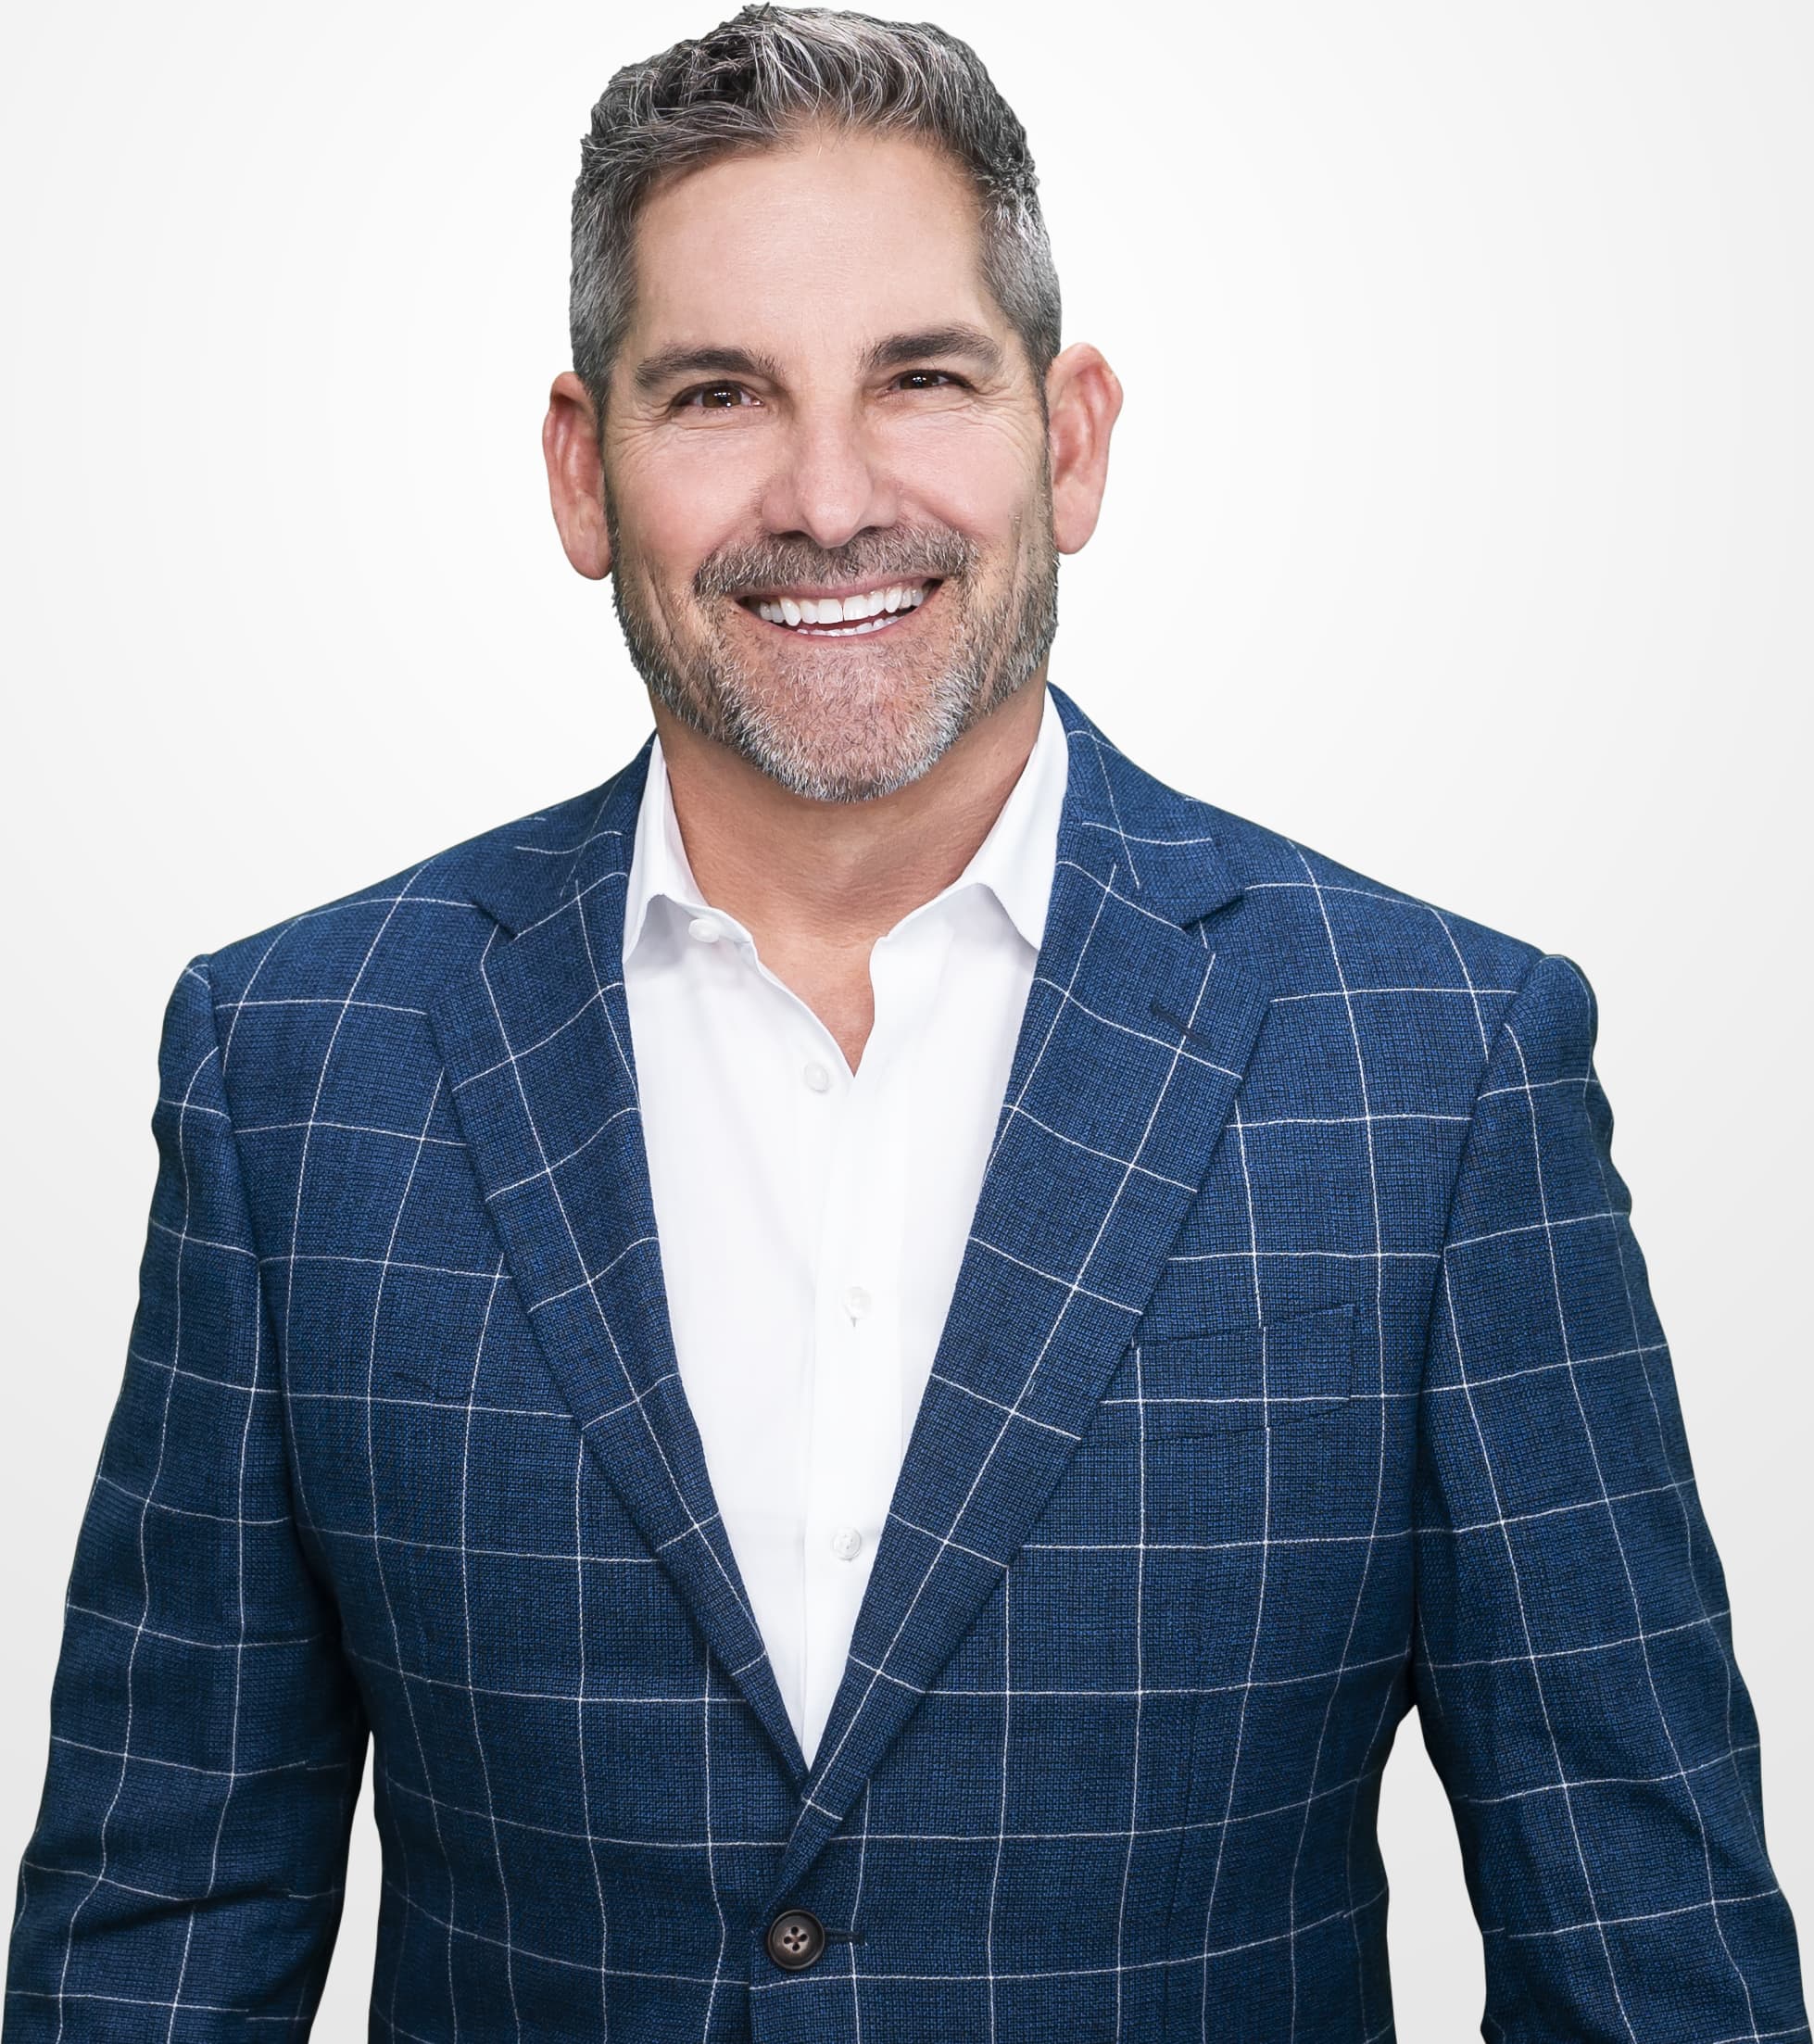 What Is 10x Grant Cardone